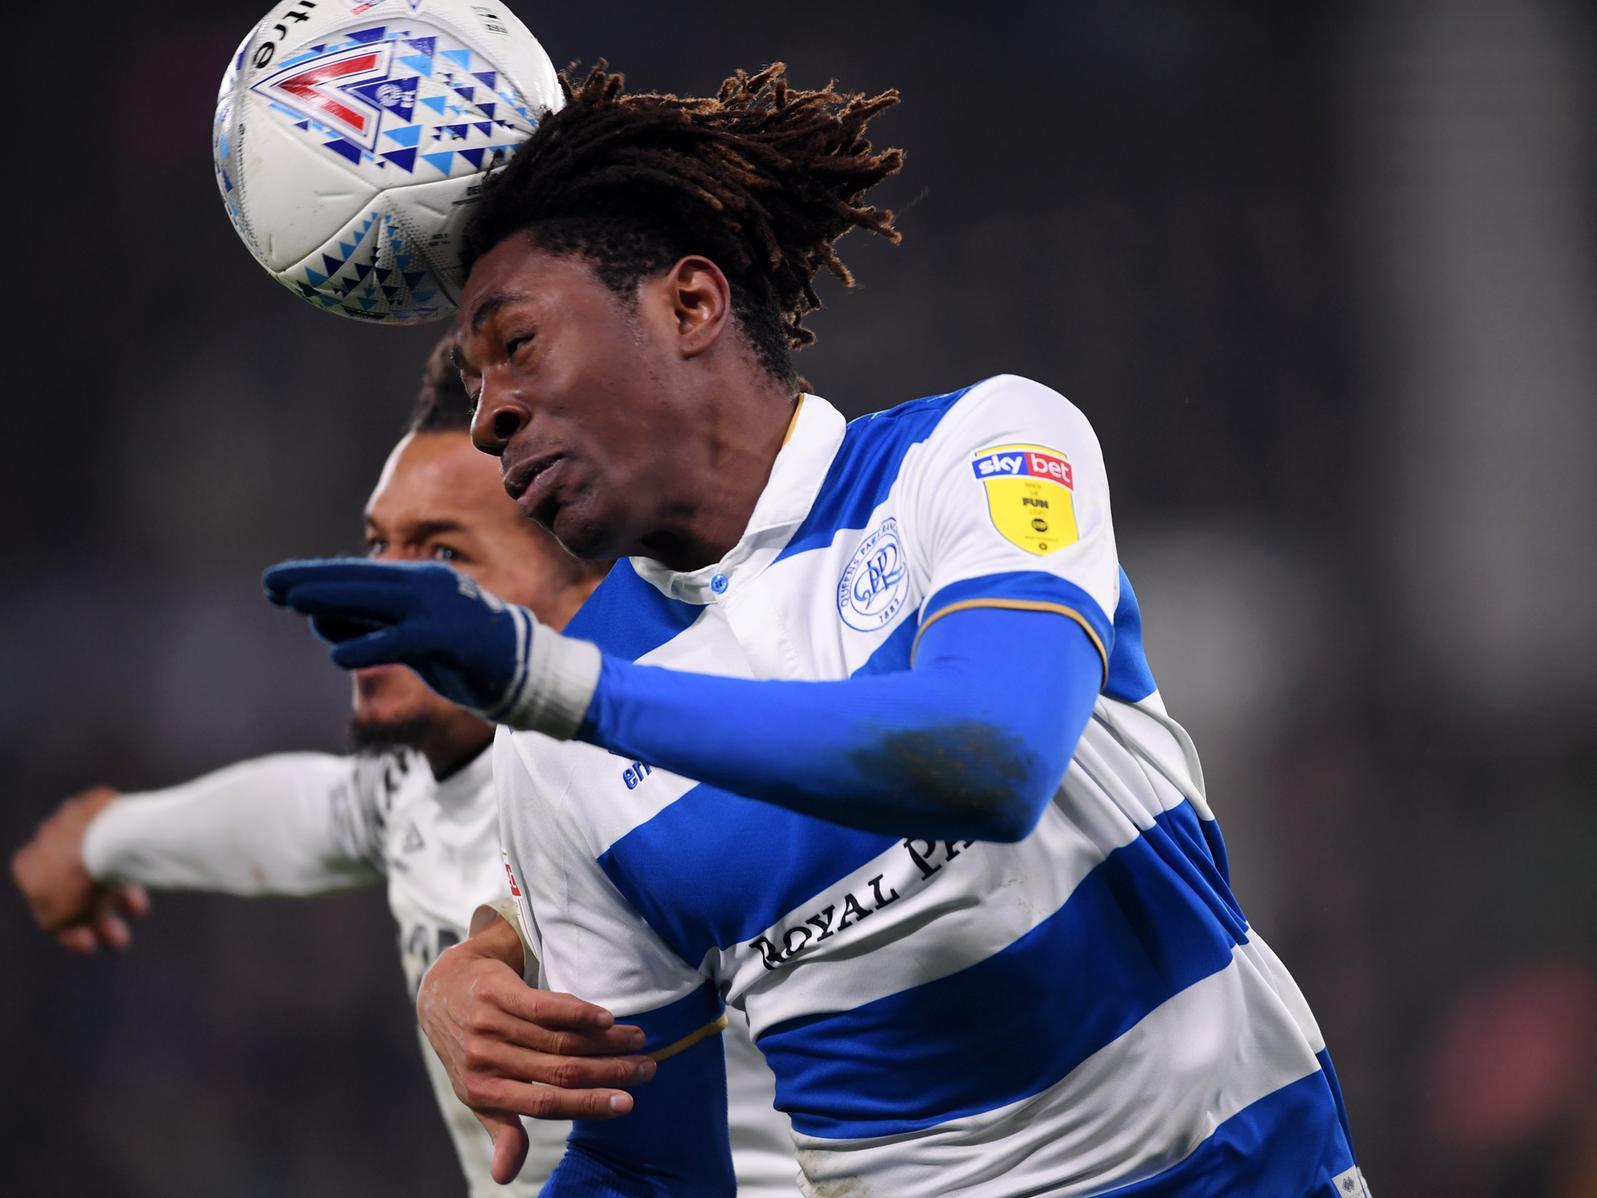 Crystal Palace are said to be keeping a close eye on Queens Park Rangers sensation Eberechi Eze, and could look to launch a move for the England U21 international this summer. (The Sun)